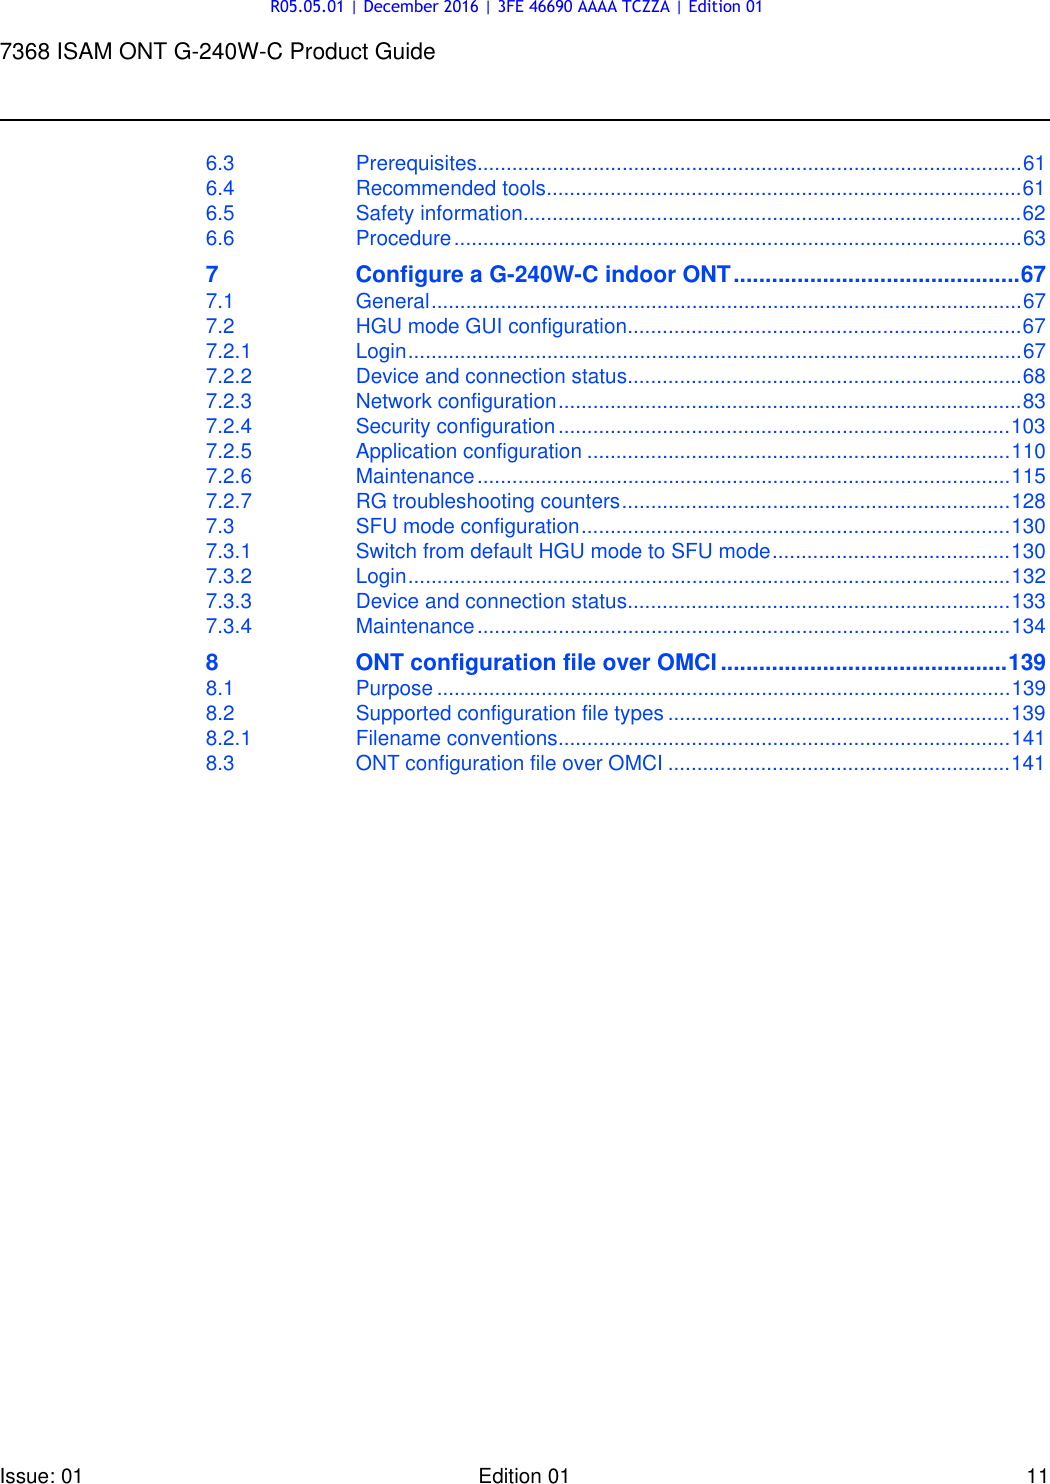 Page 11 of Nokia Bell G240W-C GPON ONU User Manual 7368 ISAM ONT G 240W B Product Guide